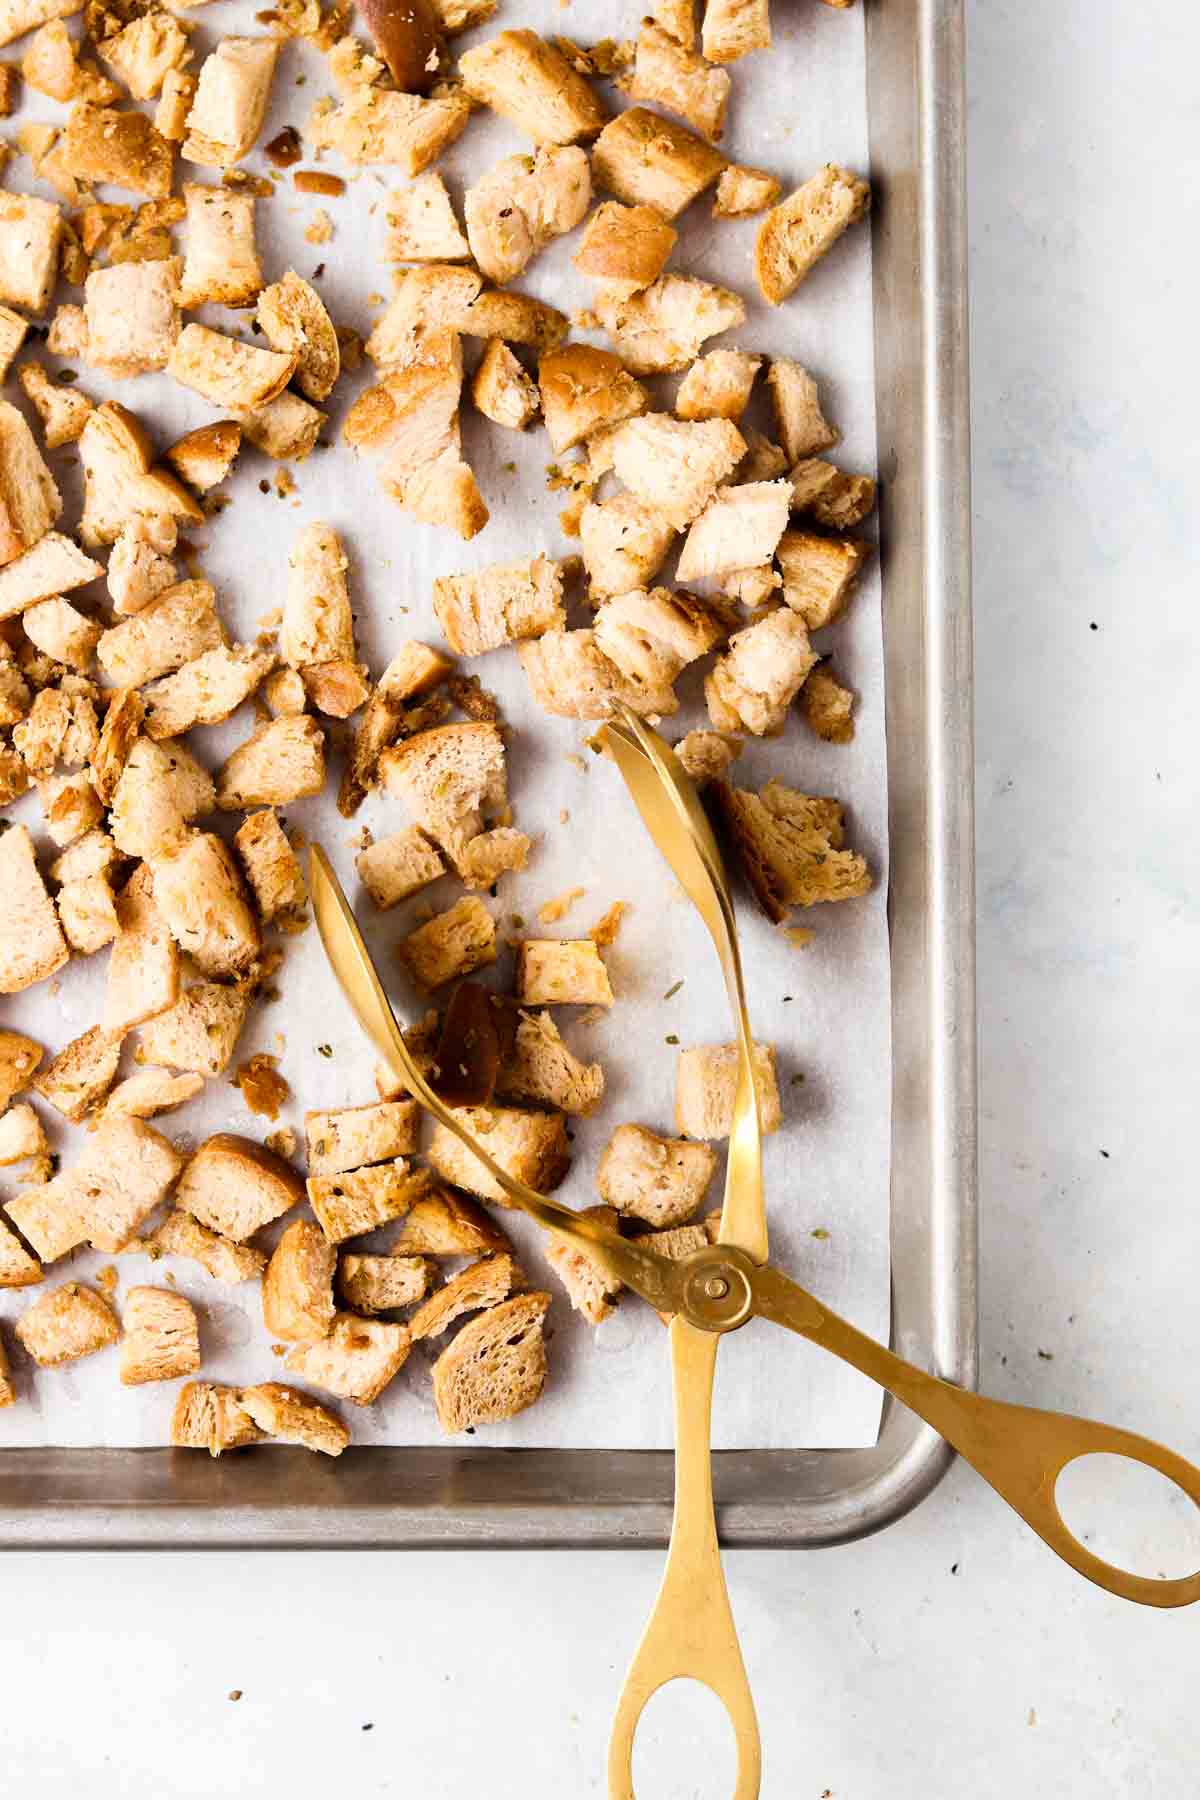 Baked gluten free croutons with tons on a baking sheet.